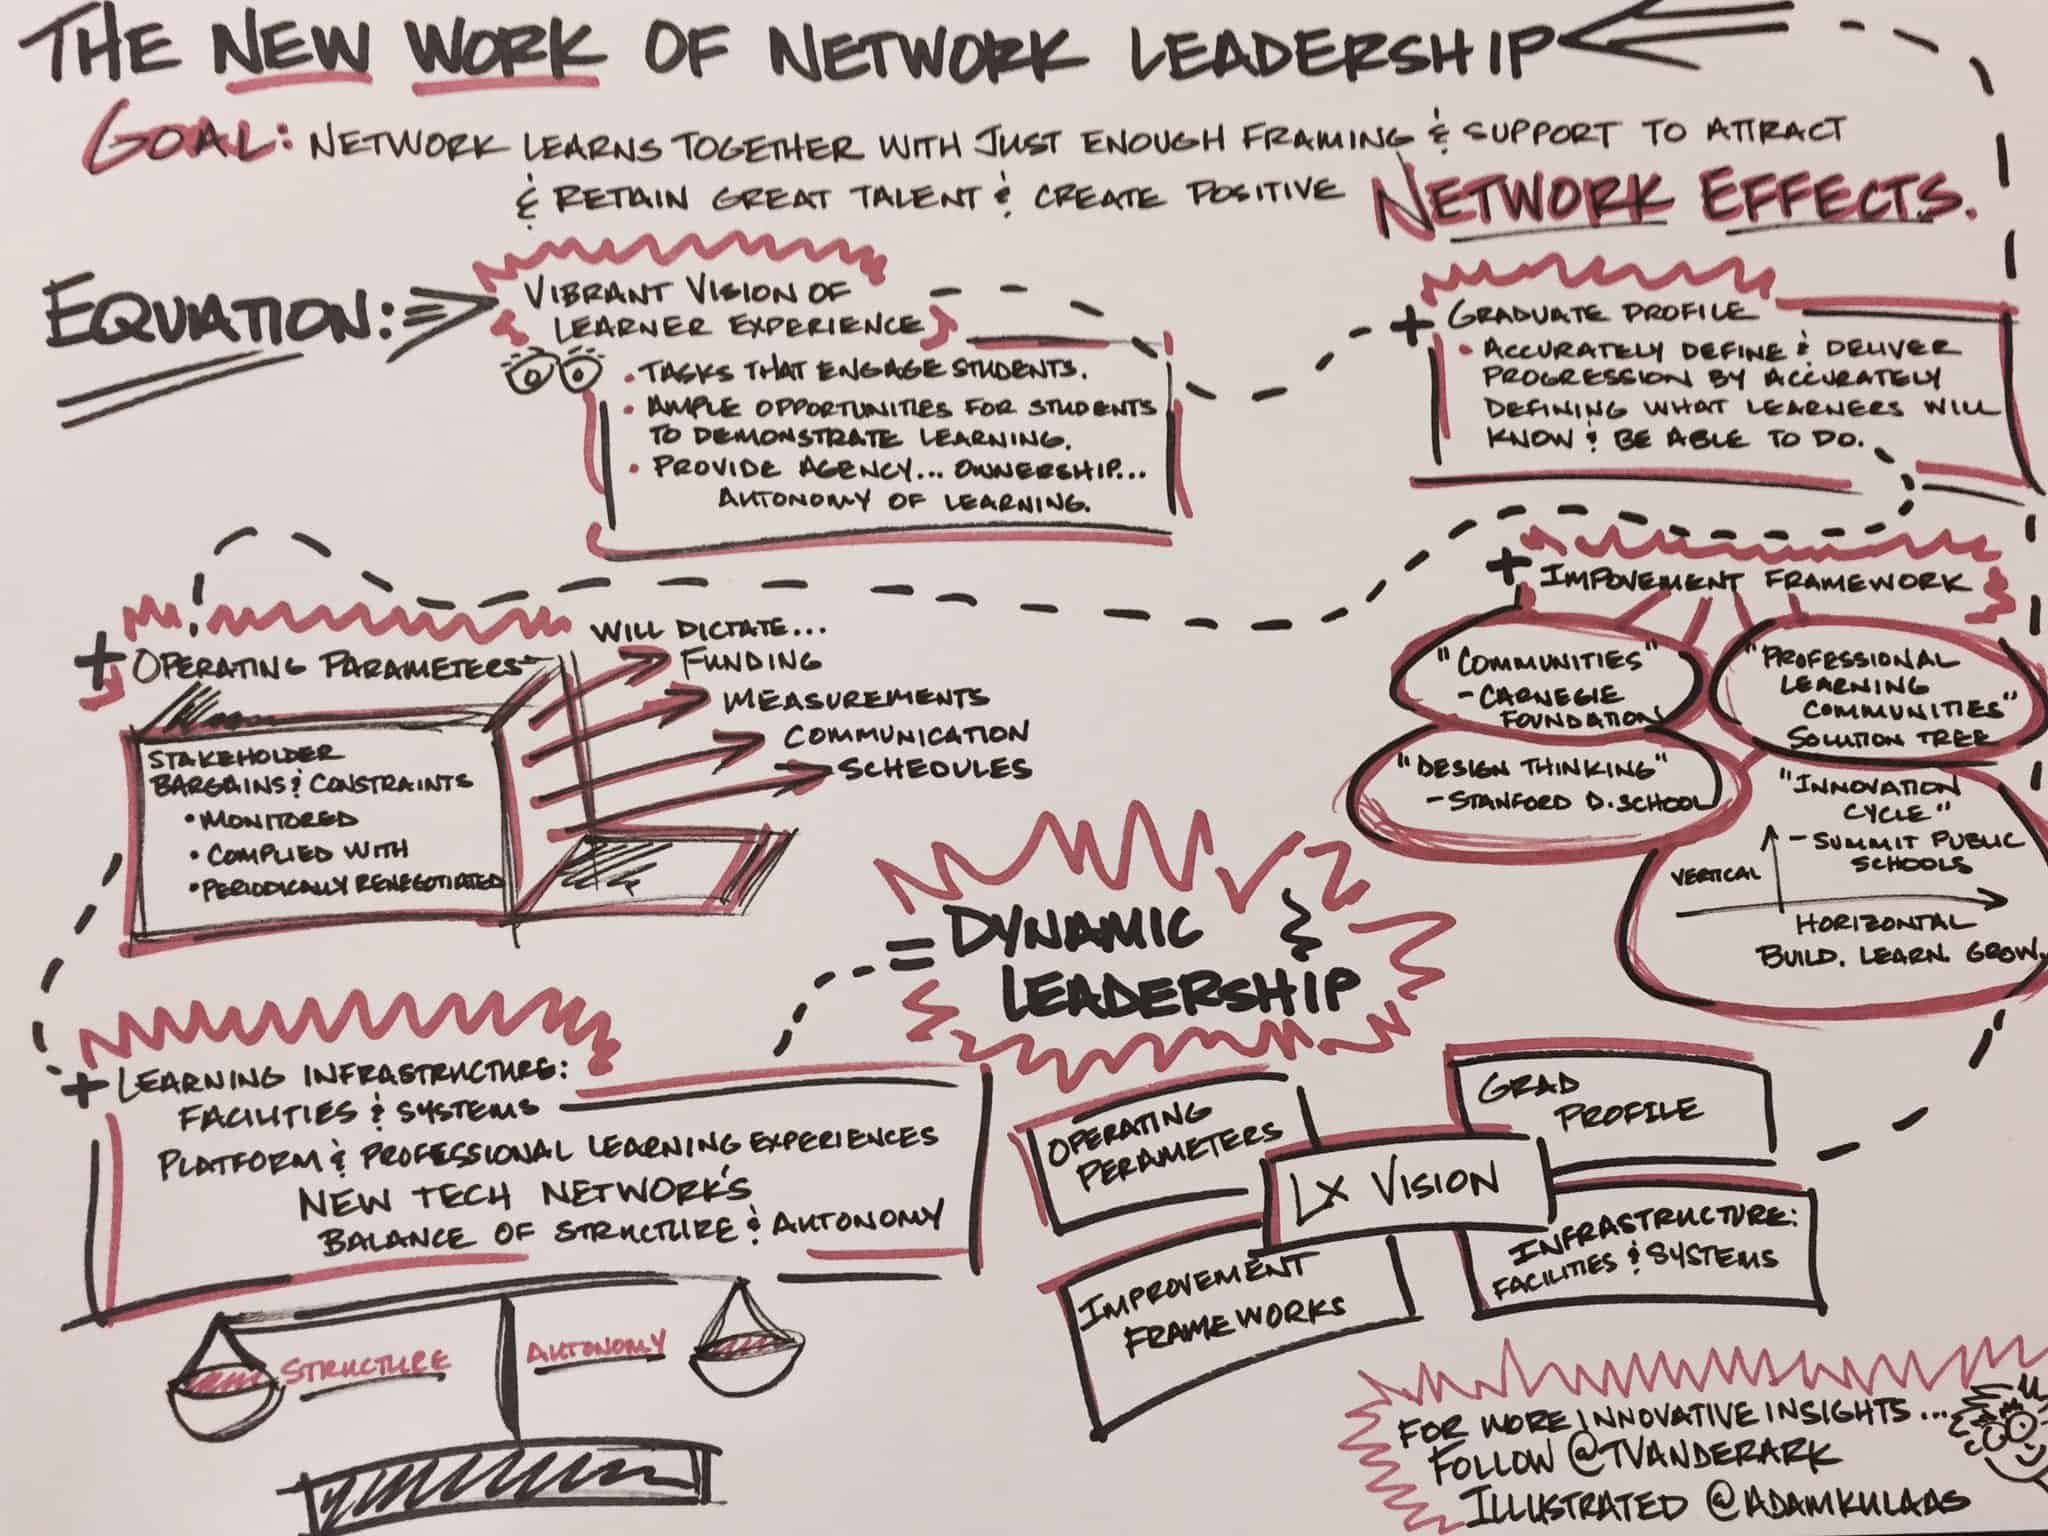 The New Work of Network Leadership | Getting Smart